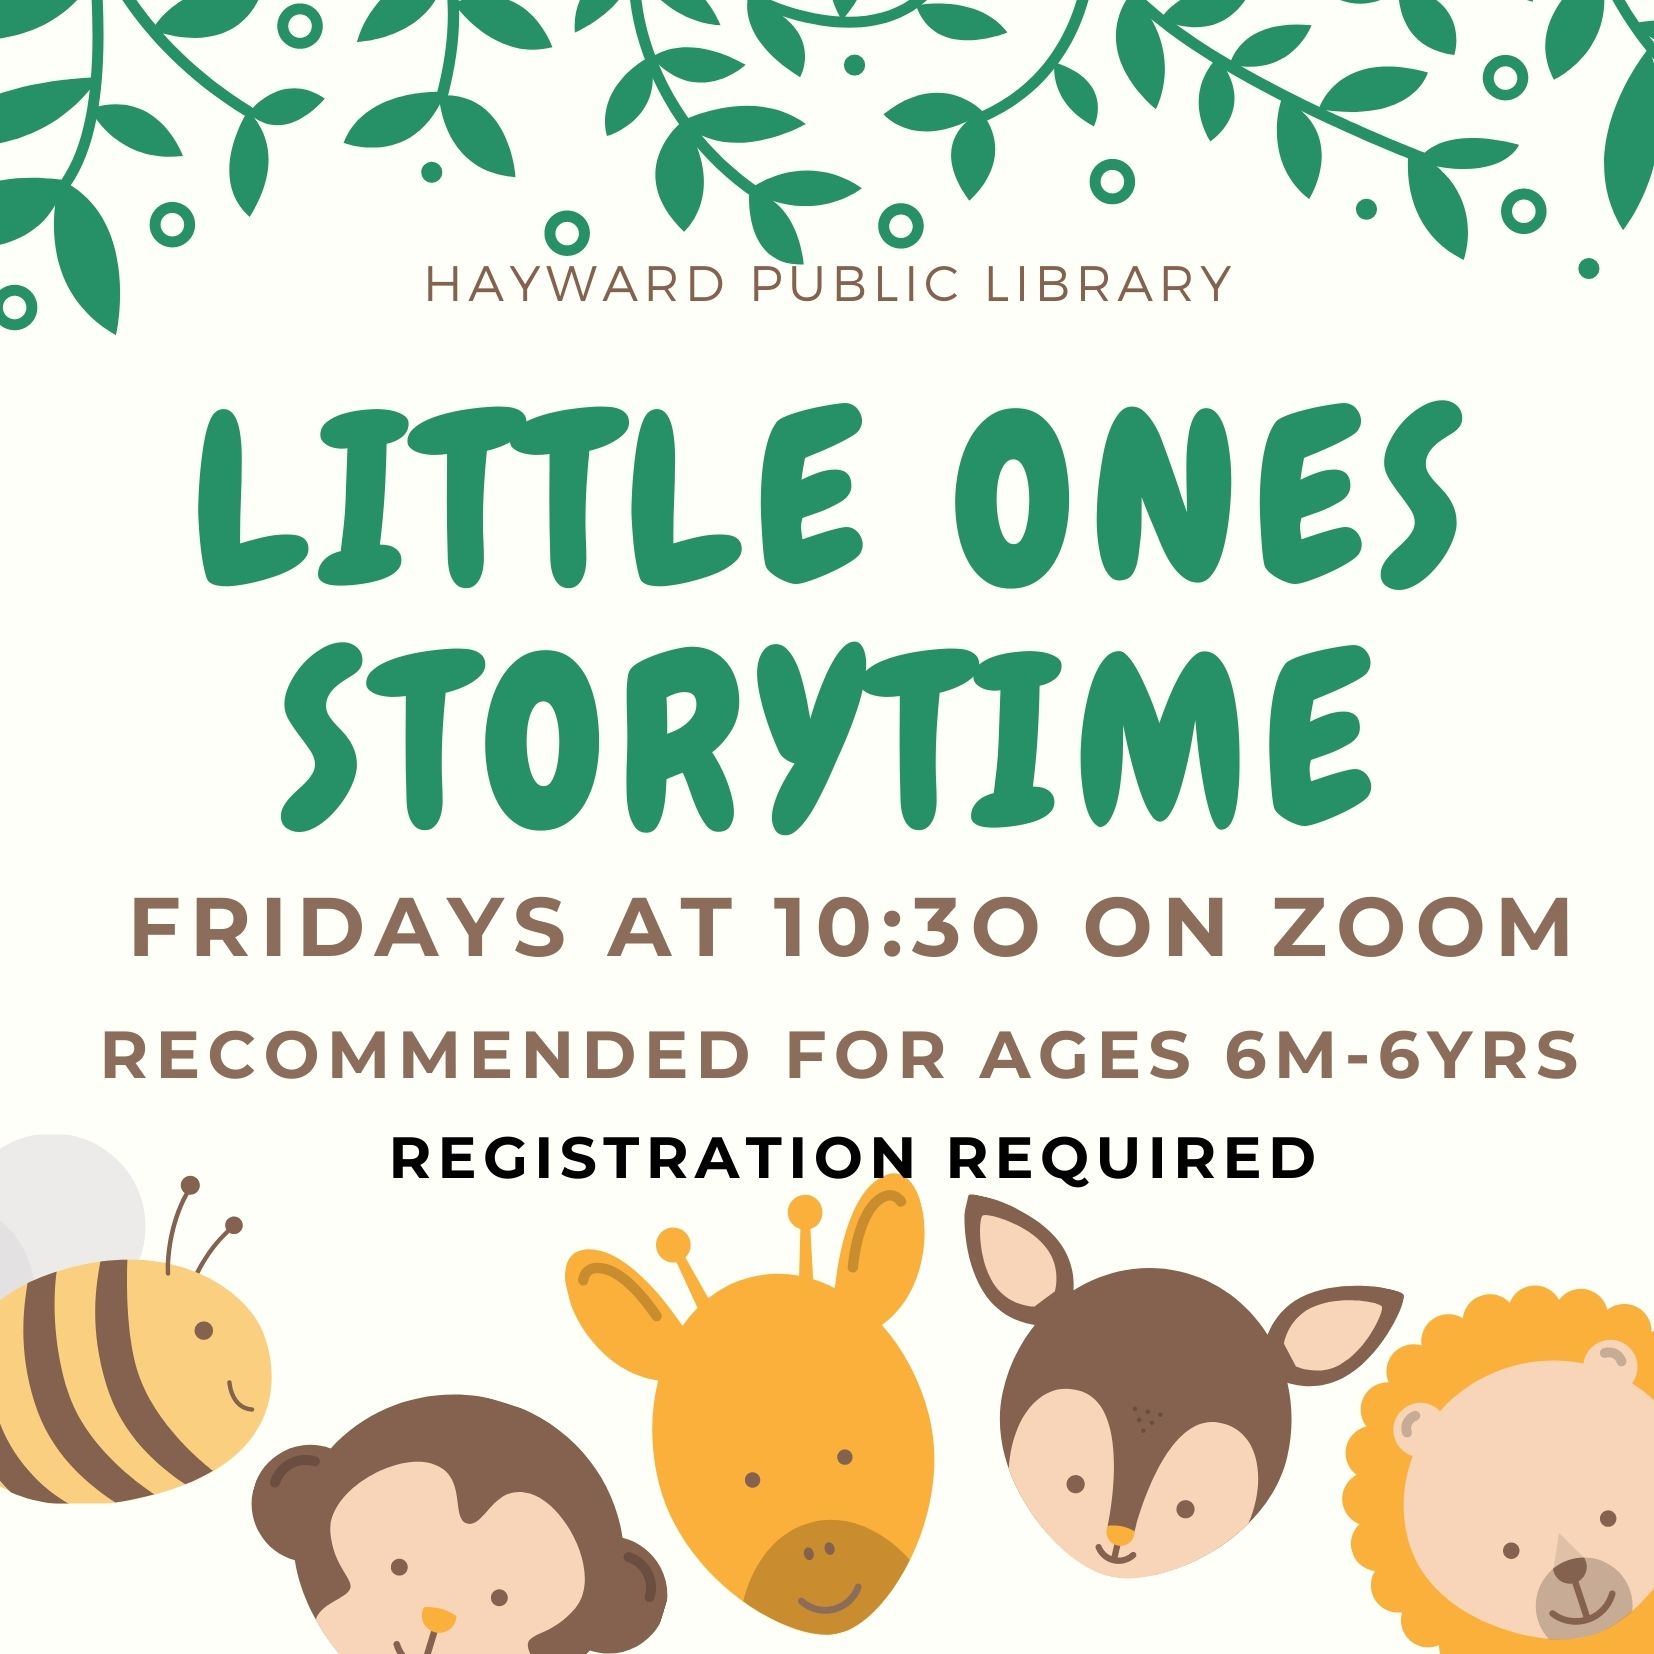 Image description: Flyer with leaves and cute baby animals, Text reads: Little Ones Storytime, Fridays at 10:30 on Zoom, recommended for ages 6m-6yrs,  registration required